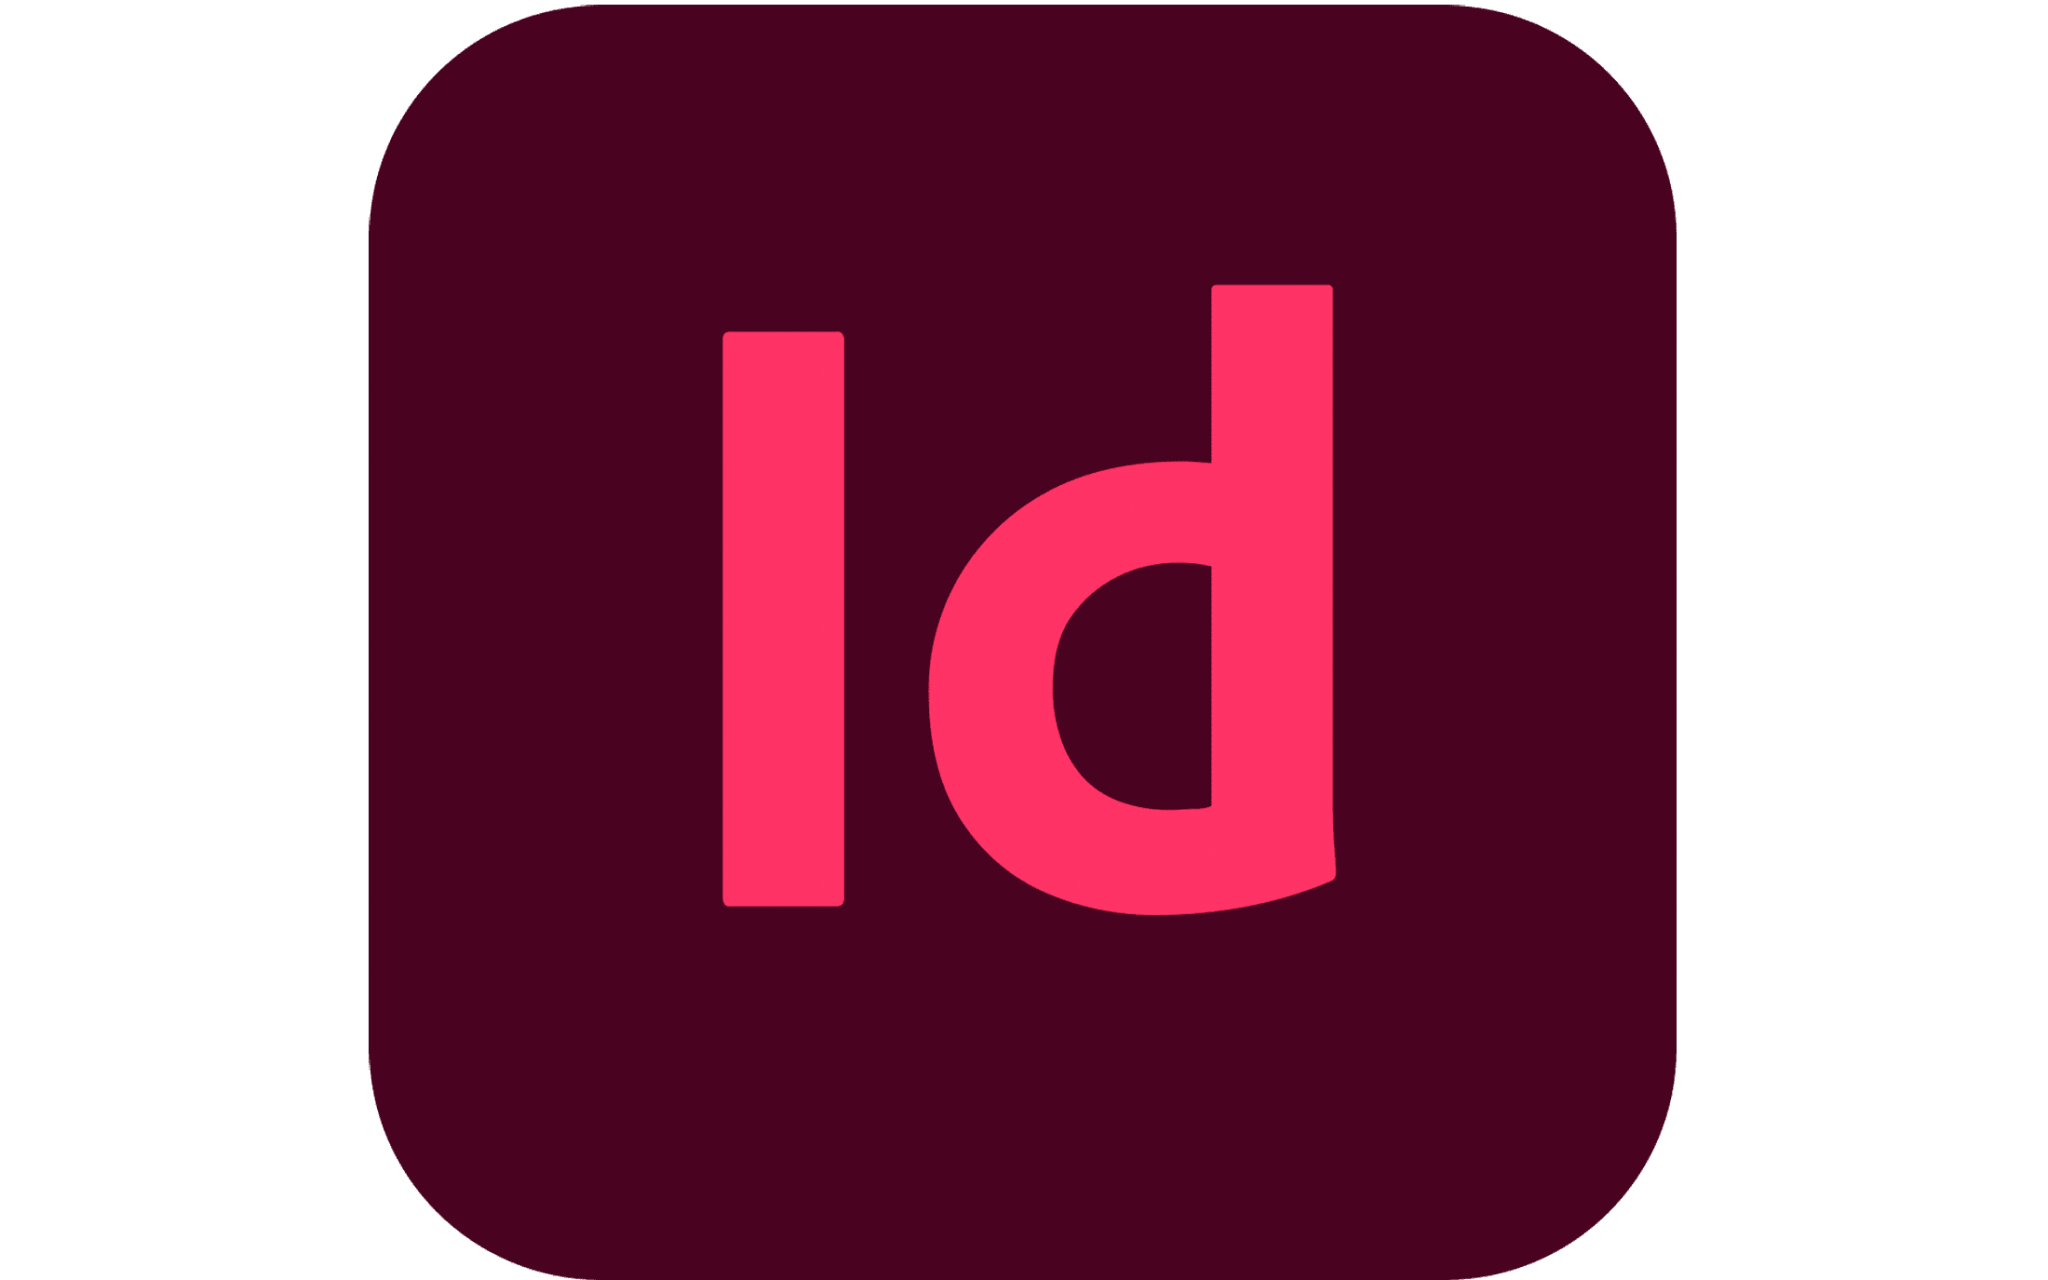 download the last version for android Adobe InDesign 2023 v18.5.0.57